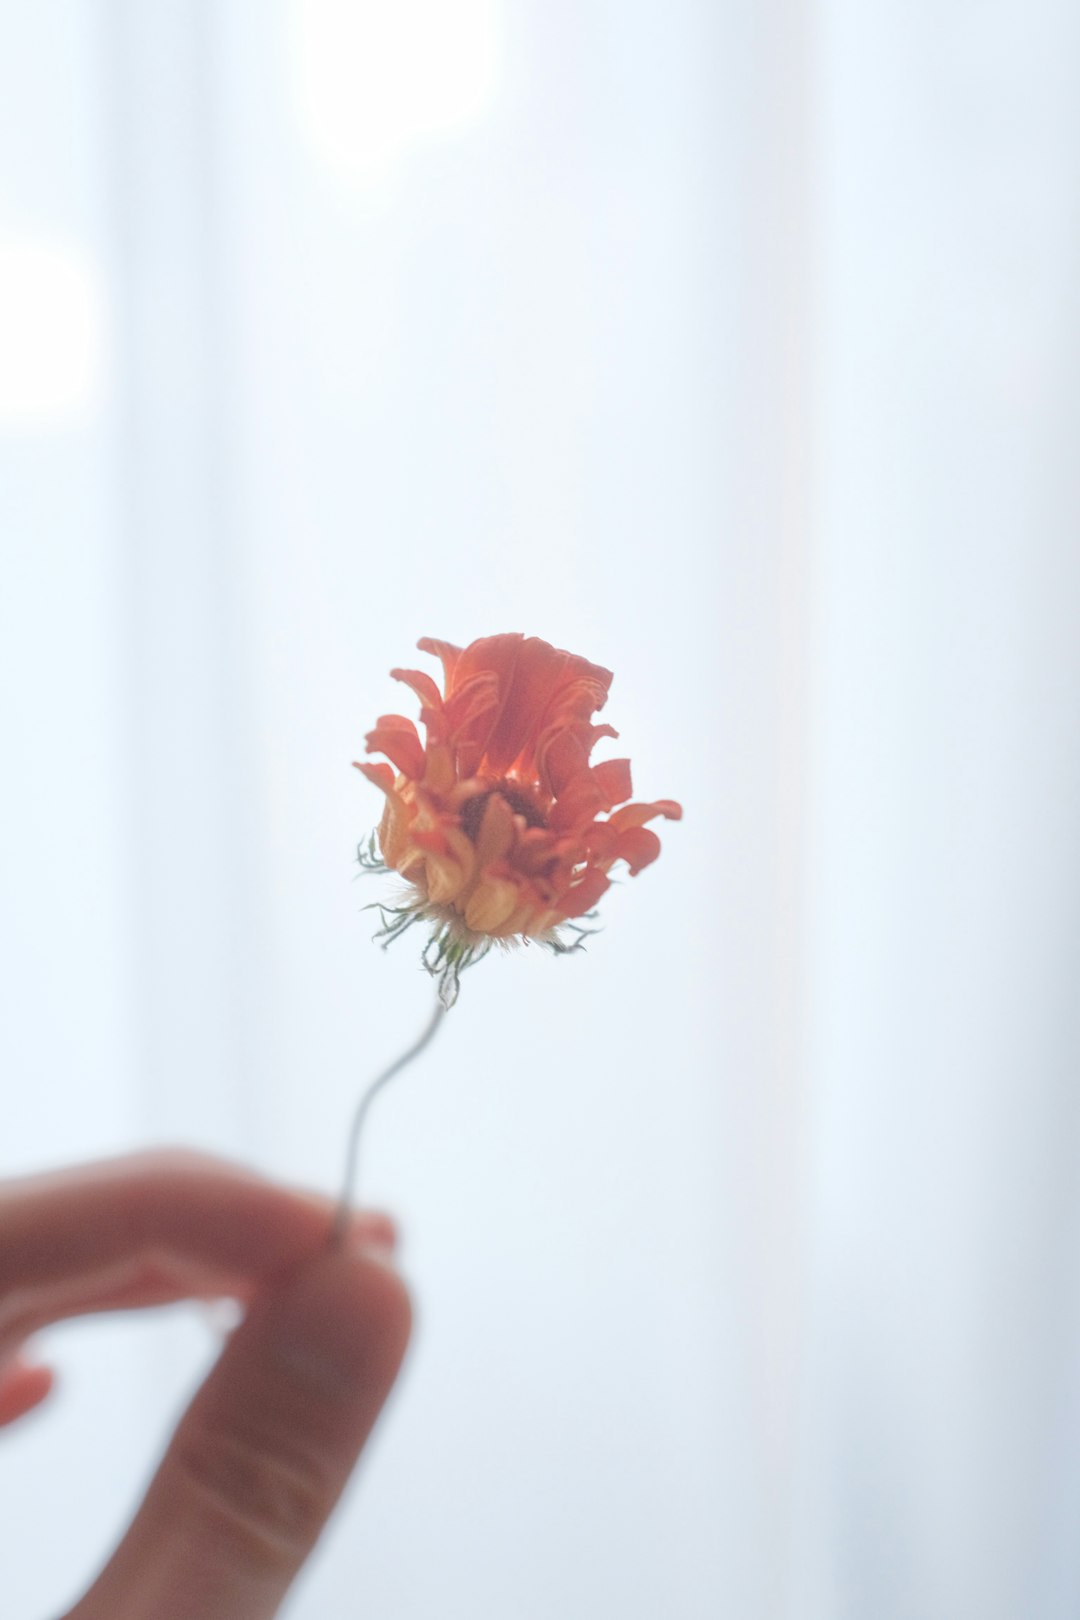 person holding orange flower in close up photography